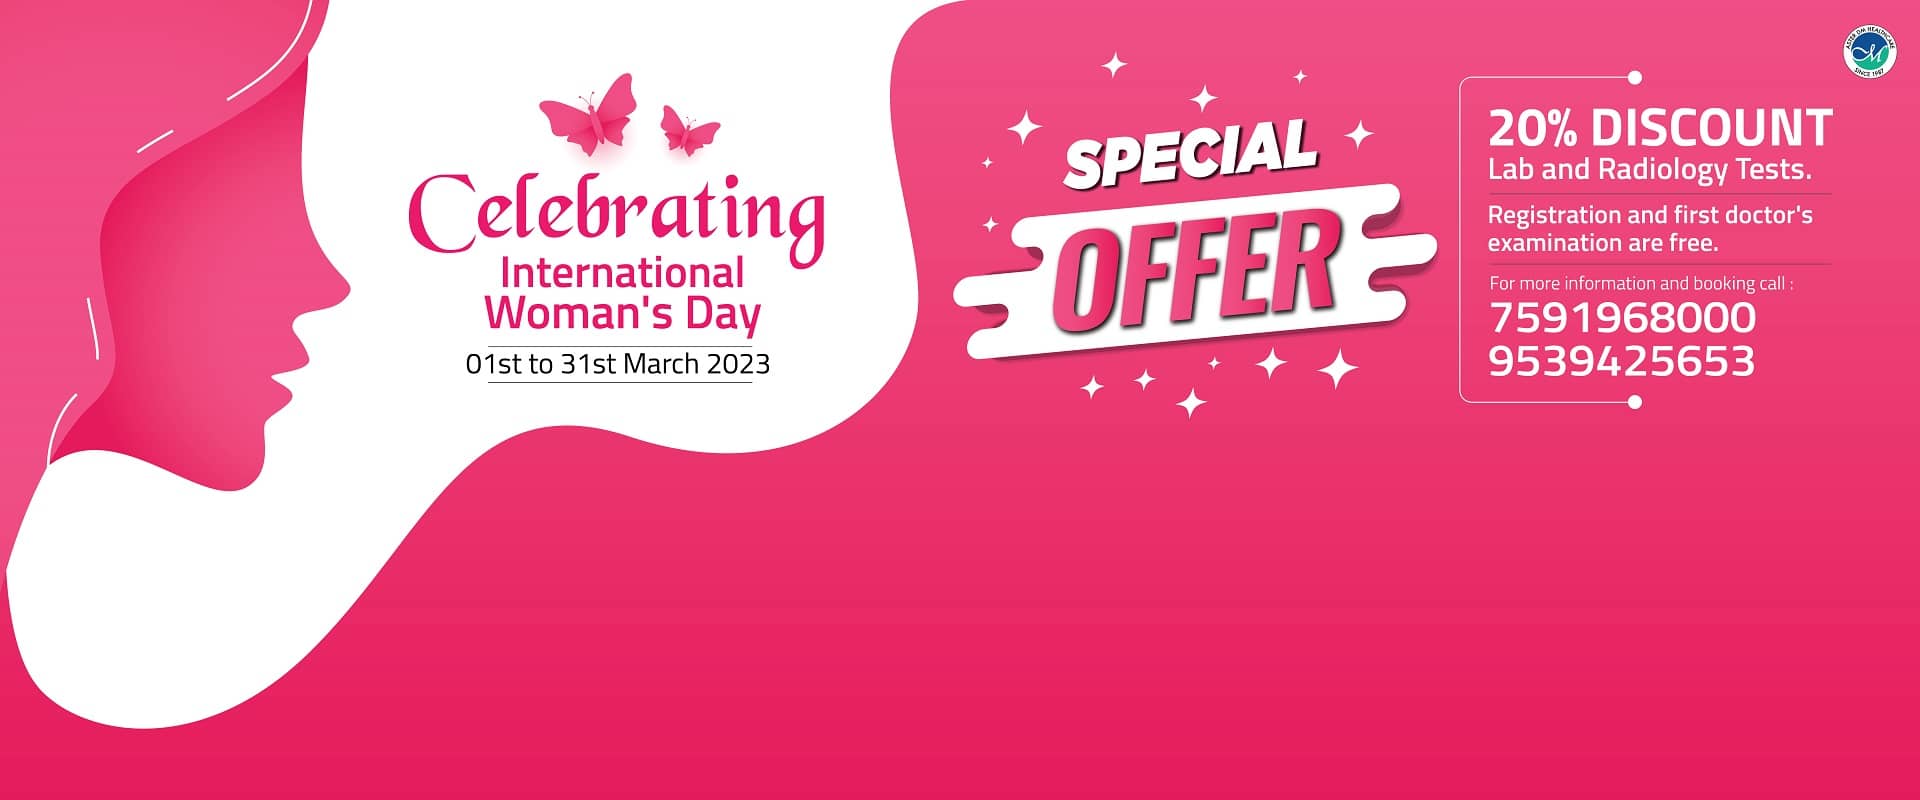 Womens Day Special offer by Aster MIMS Calicut, valid till 31st March 2023